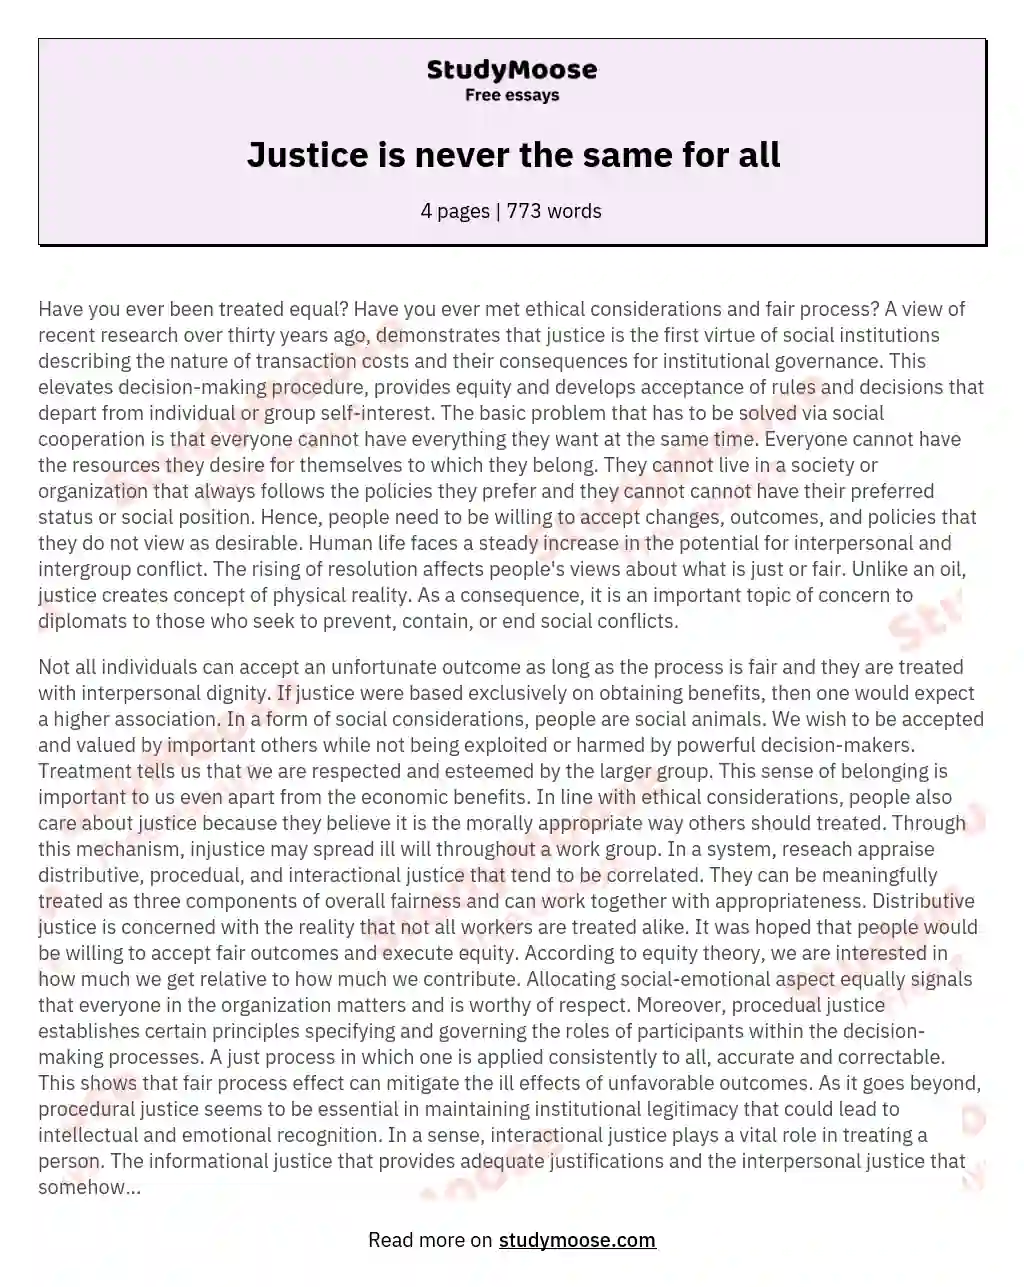 Justice is never the same for all essay